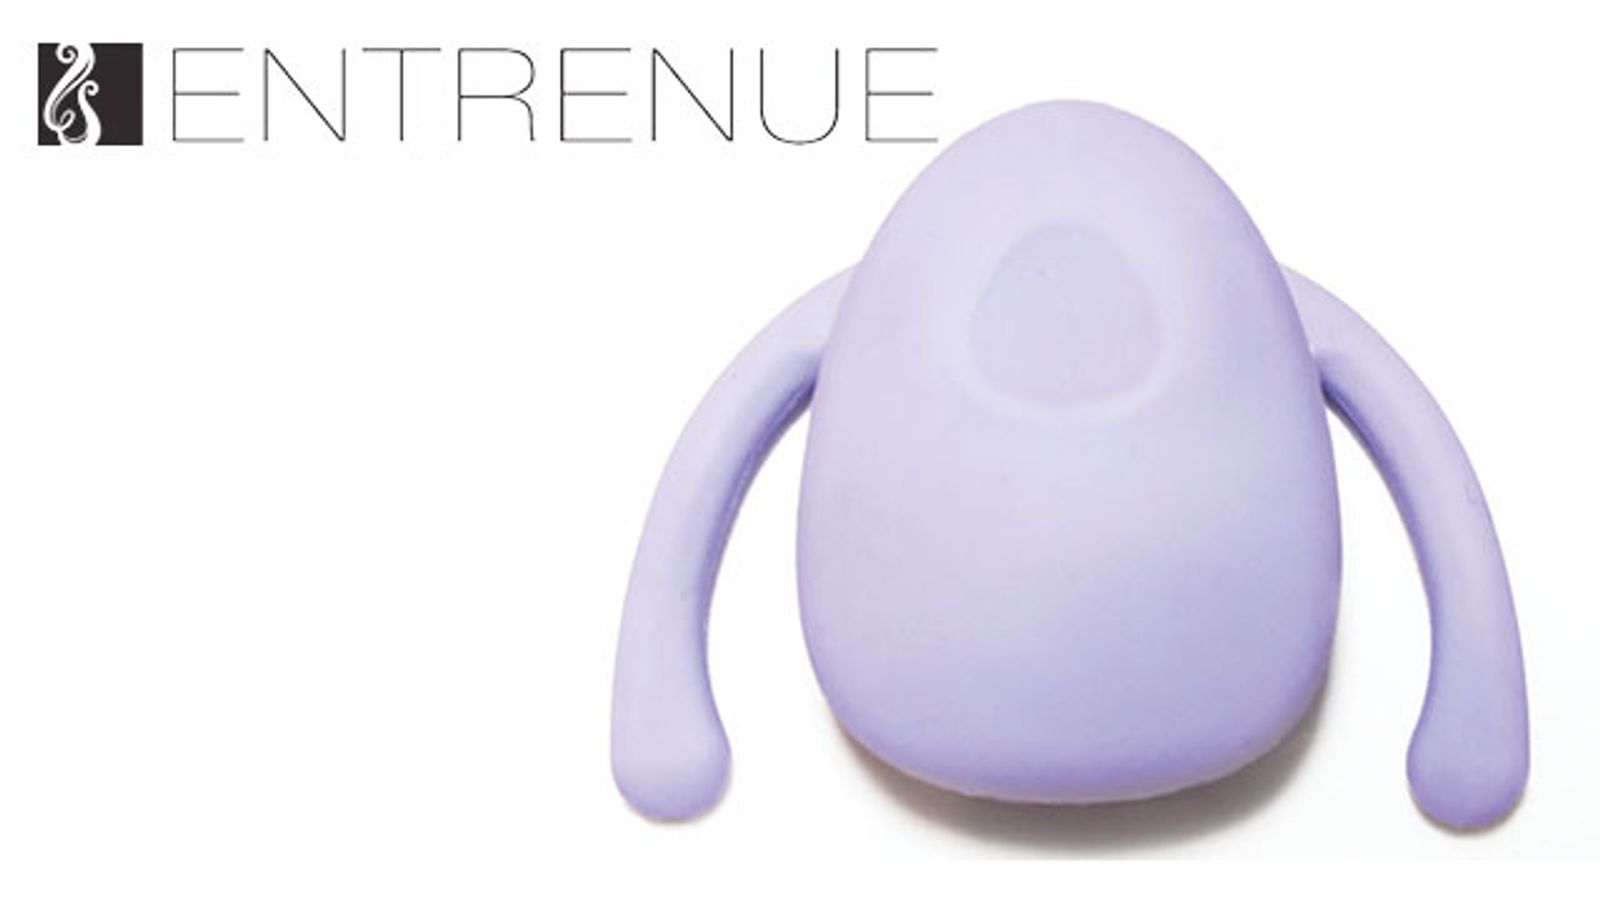 Entrenue First to Distribute Crowdfunded Eva Vibrator